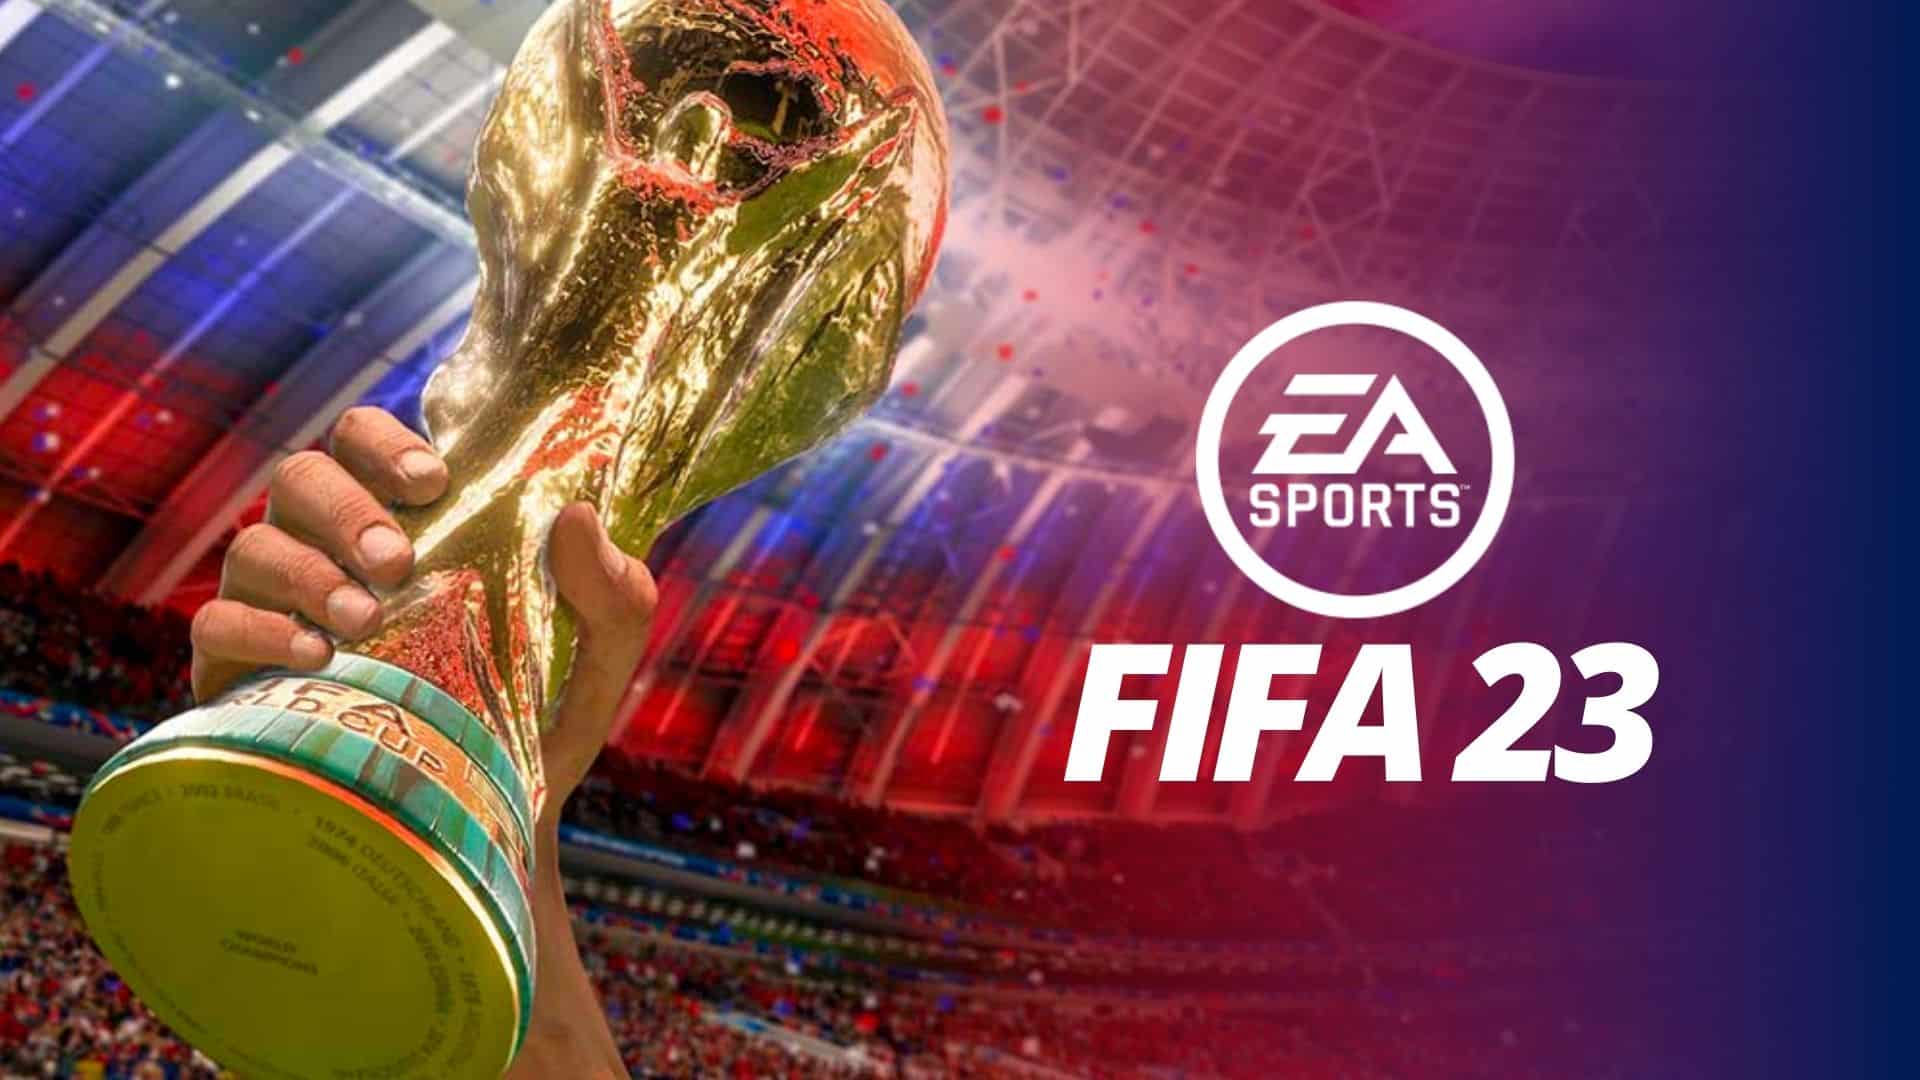 Will FIFA 23 have crossplay? Platforms, new features, game modes, and more